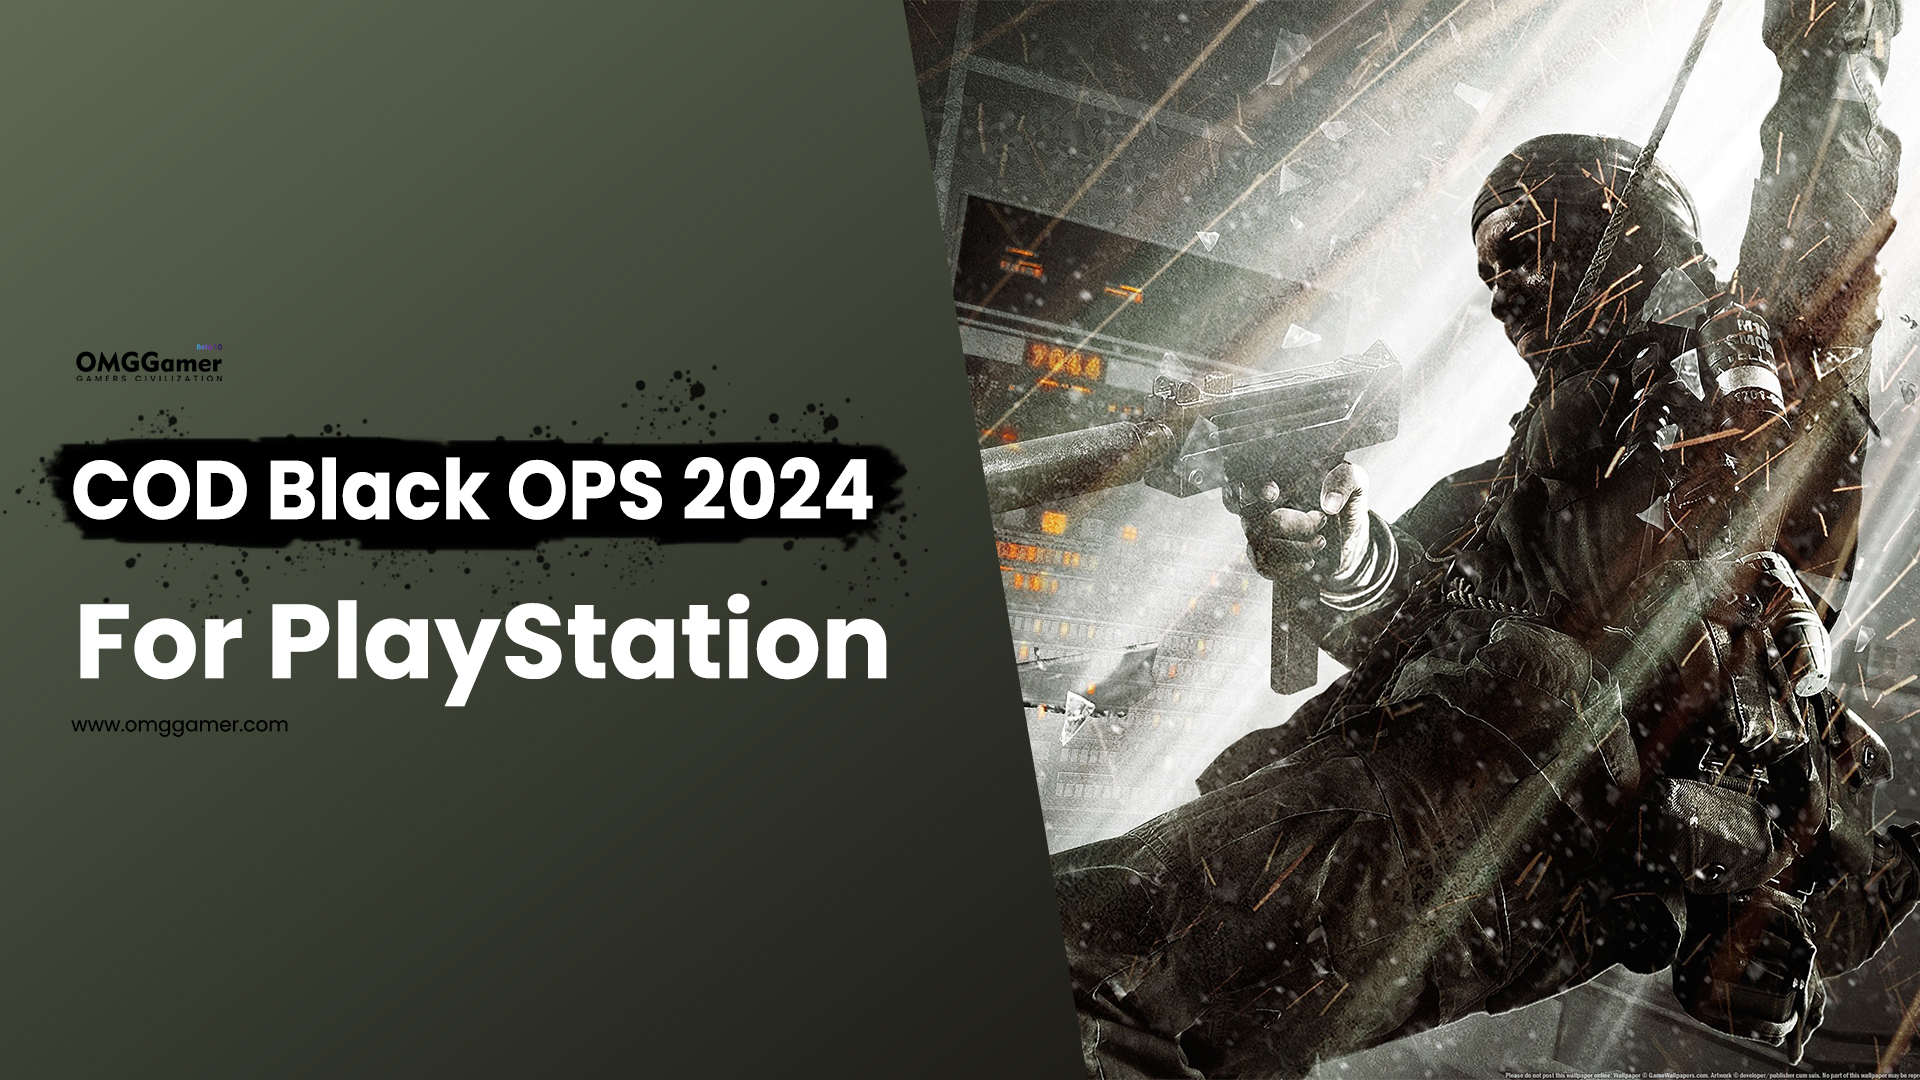 COD Black OPS 2024 for PlayStation